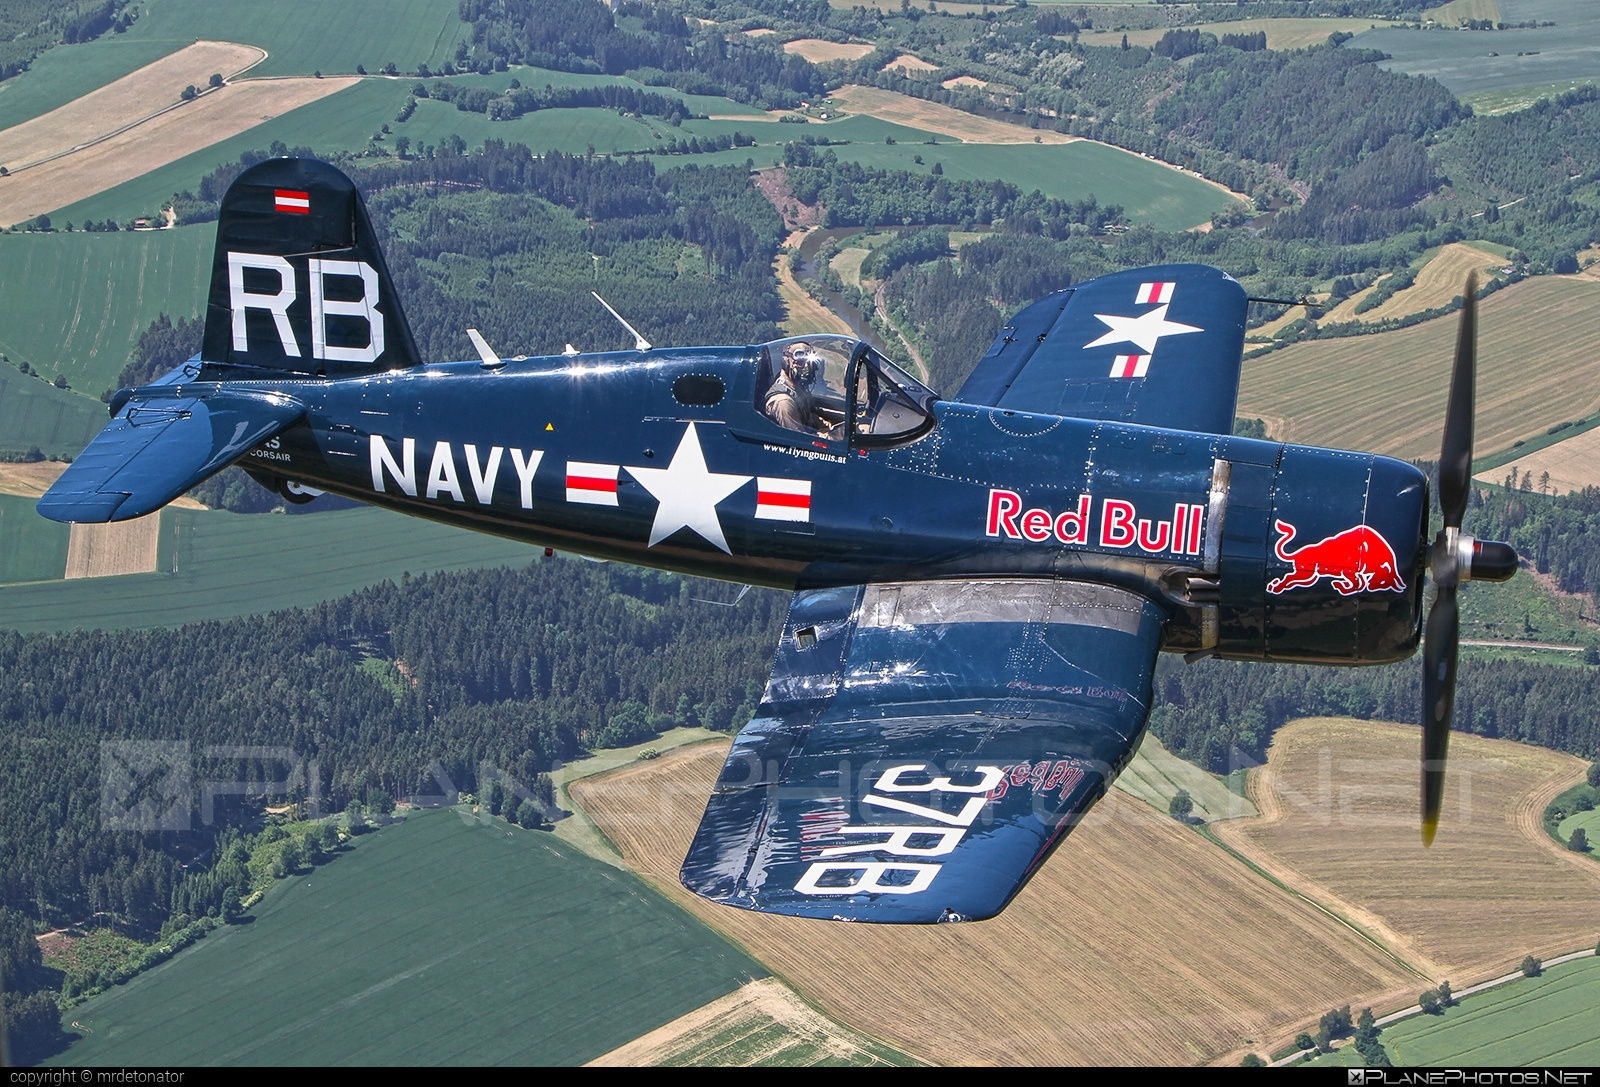 Vought F4U-4 Corsair - OE-EAS operated by The Flying Bulls #corsair #theflyingbulls #vought